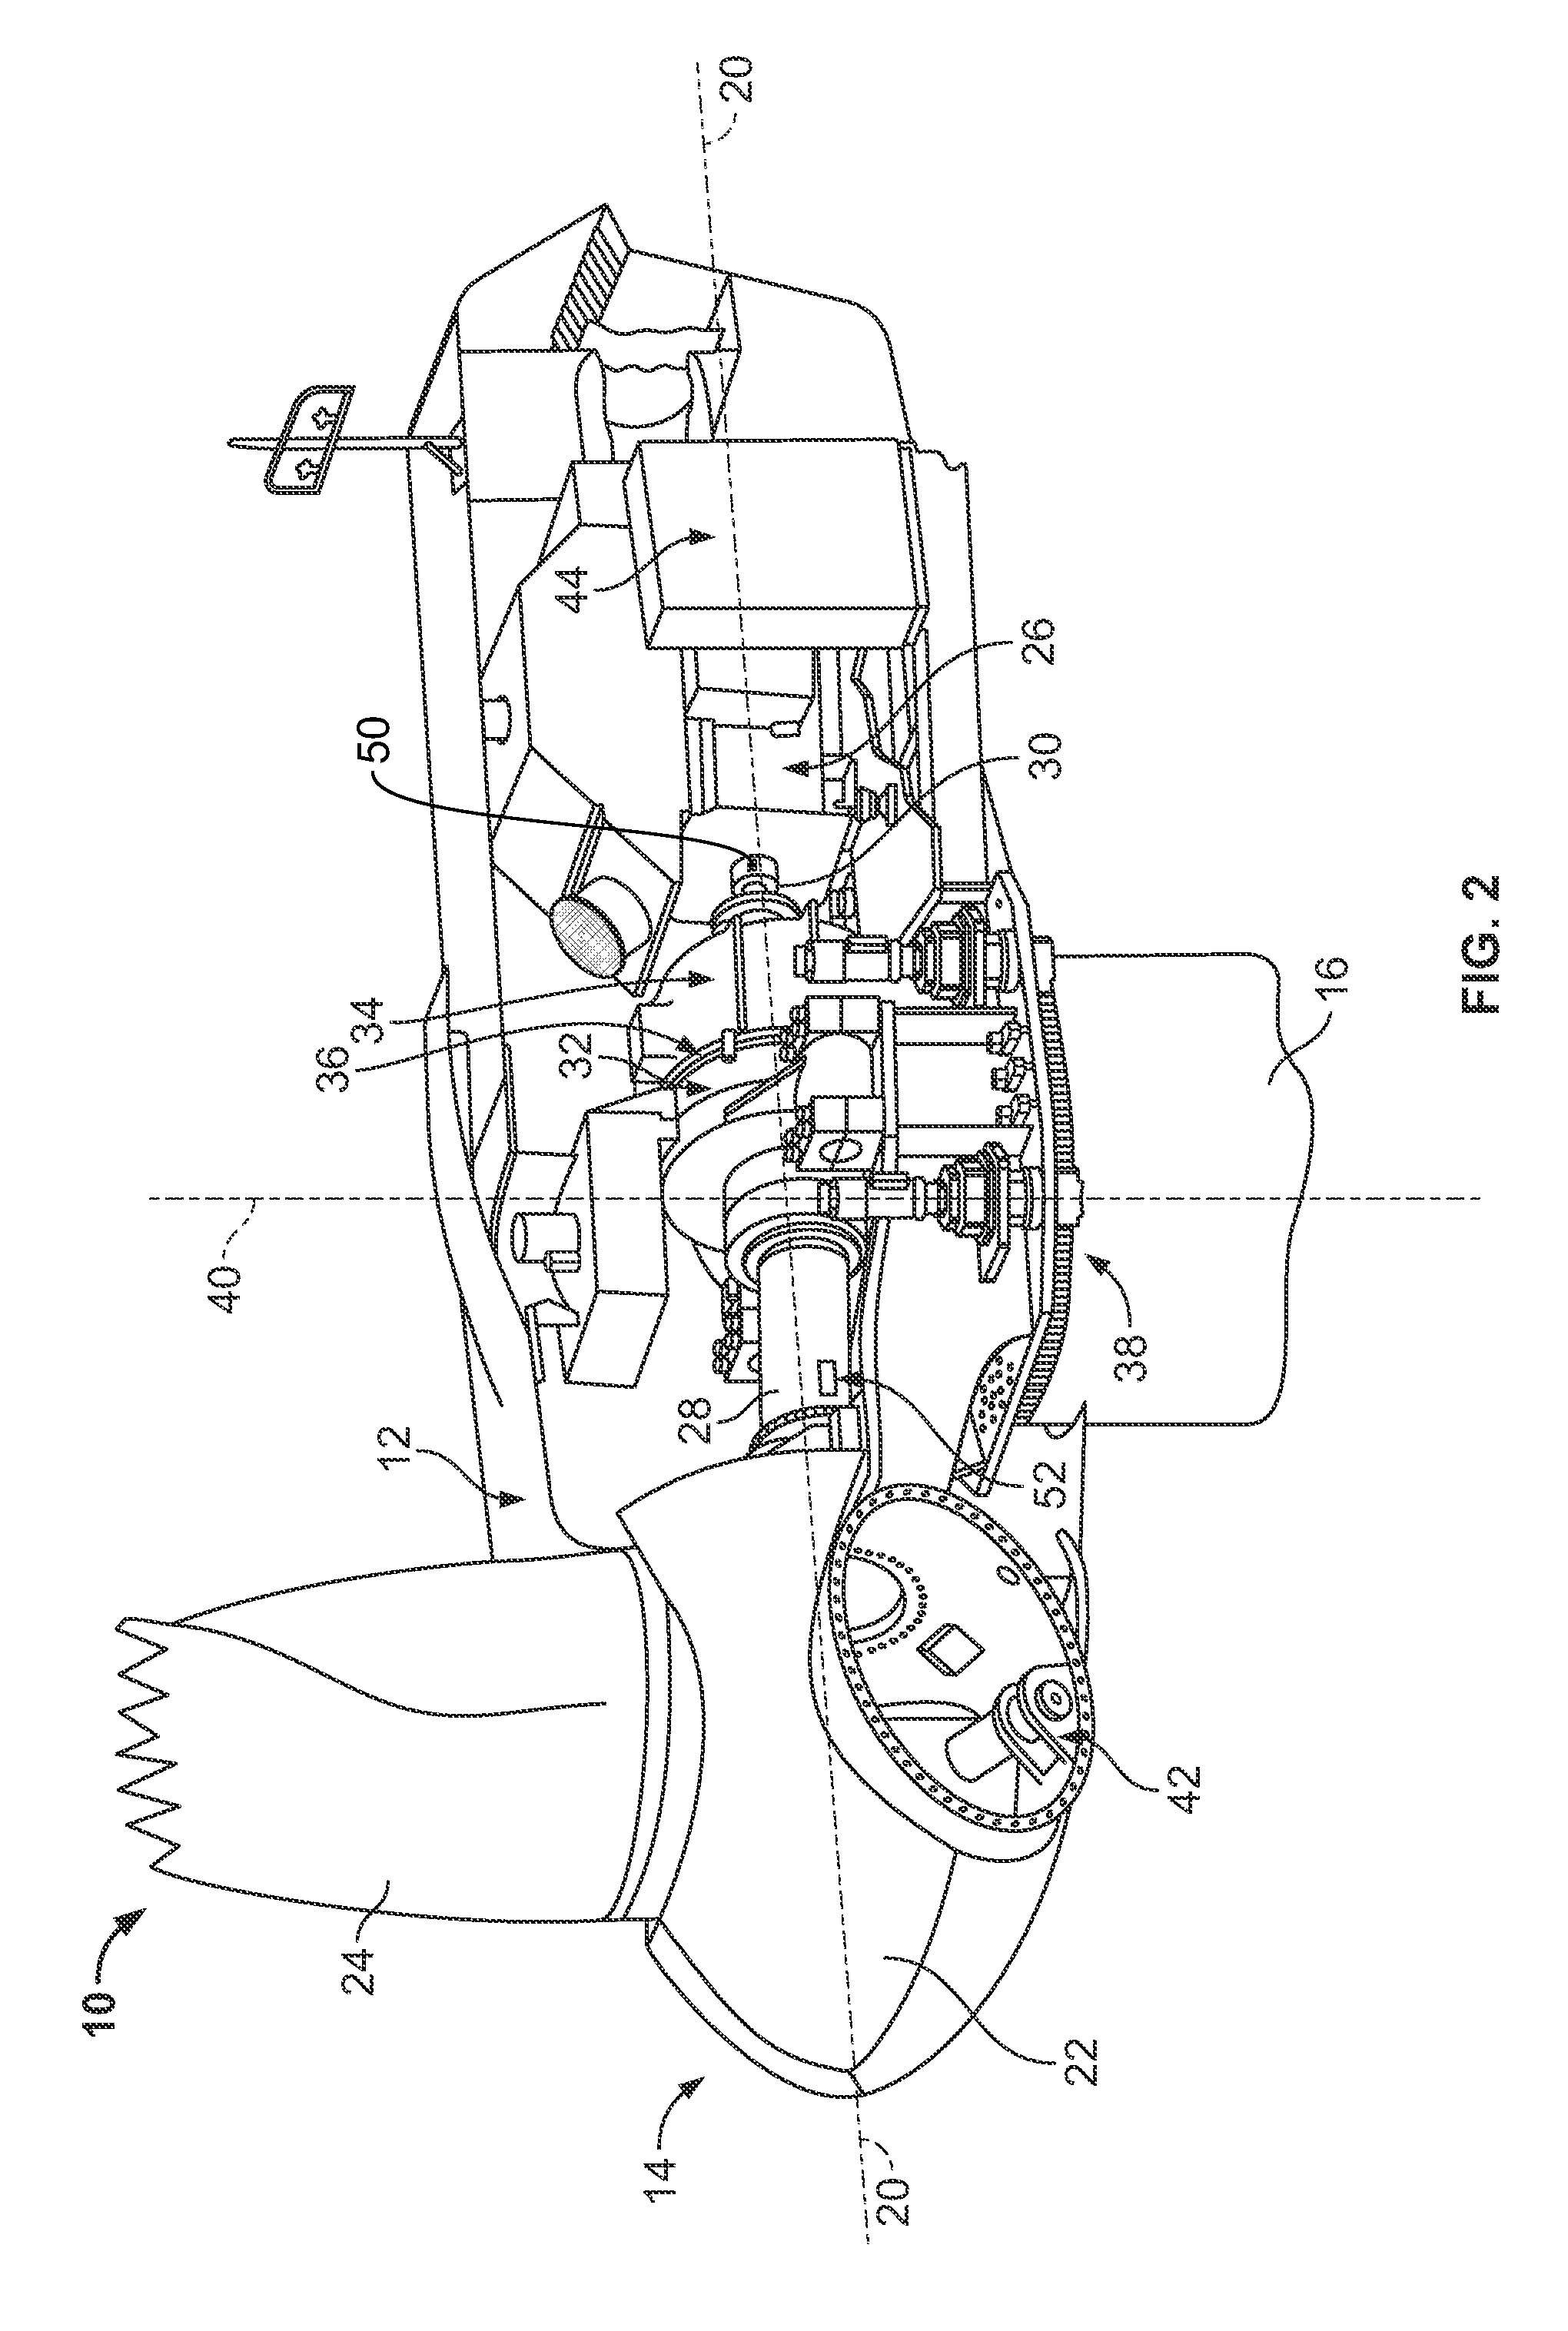 System and methods for controlling a wind turbine